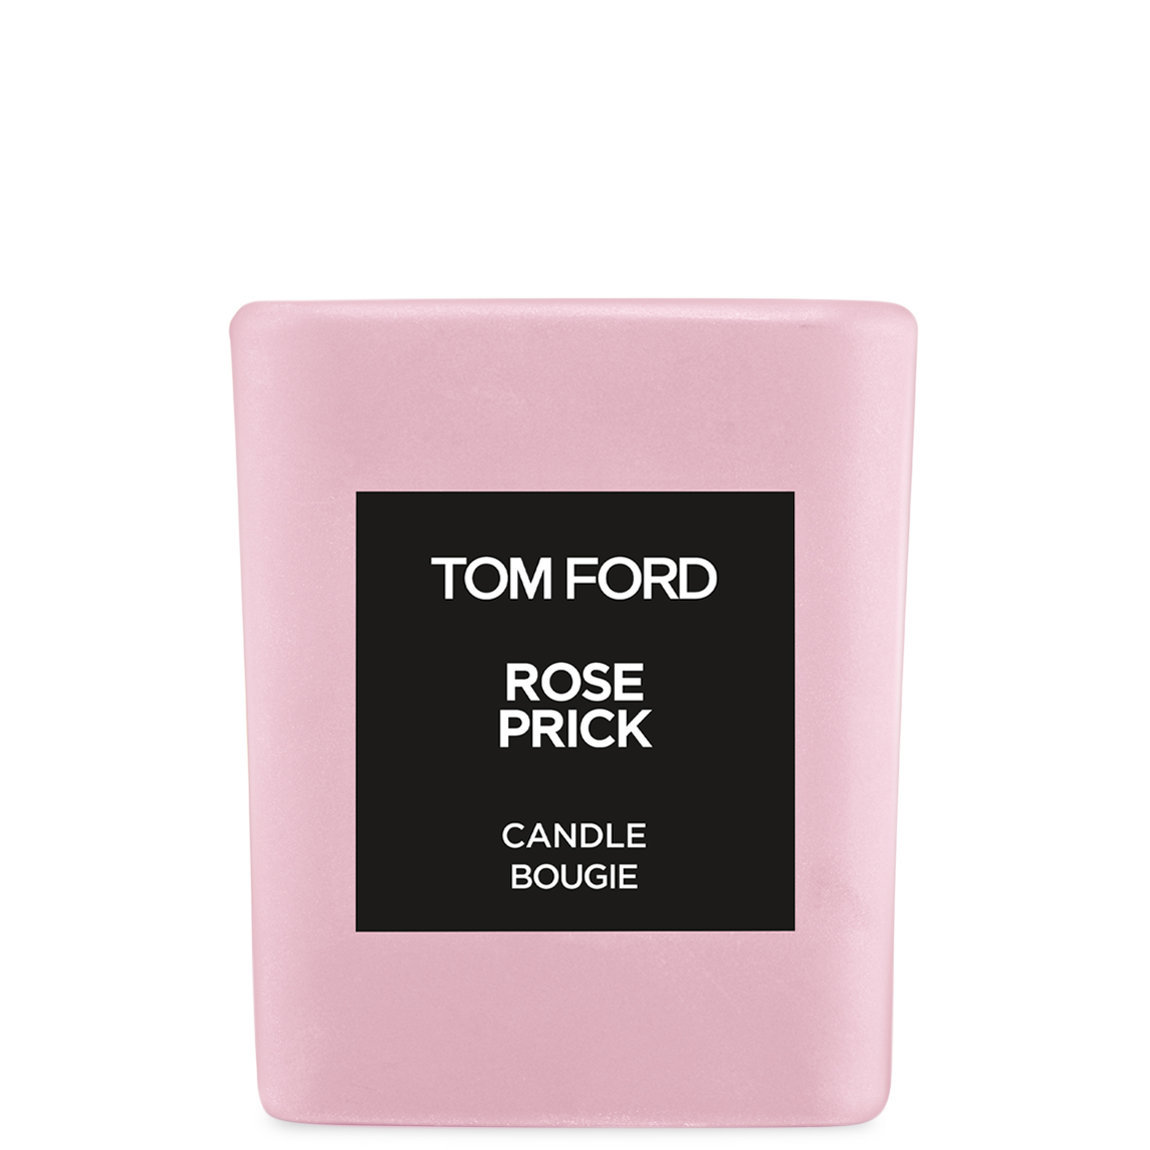 TOM FORD Rose Prick Candle alternative view 1 - product swatch.